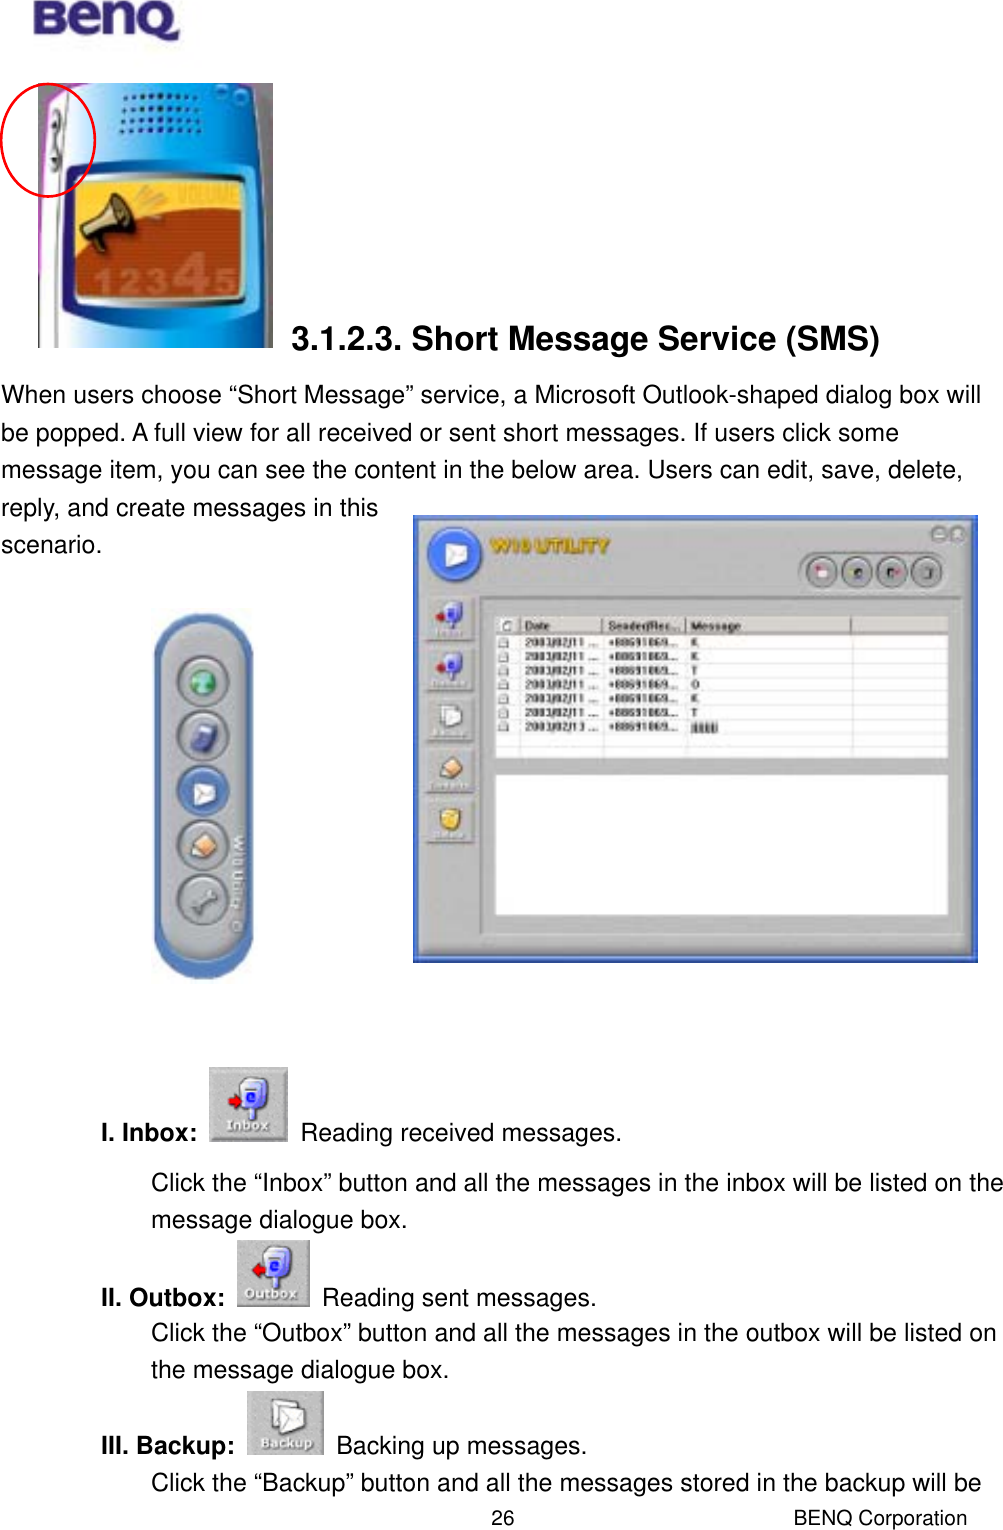  BENQ Corporation 26      3.1.2.3. Short Message Service (SMS) When users choose “Short Message” service, a Microsoft Outlook-shaped dialog box will be popped. A full view for all received or sent short messages. If users click some message item, you can see the content in the below area. Users can edit, save, delete, reply, and create messages in this scenario.              I. Inbox:    Reading received messages. Click the “Inbox” button and all the messages in the inbox will be listed on the message dialogue box.   II. Outbox:    Reading sent messages. Click the “Outbox” button and all the messages in the outbox will be listed on the message dialogue box. III. Backup:    Backing up messages. Click the “Backup” button and all the messages stored in the backup will be 